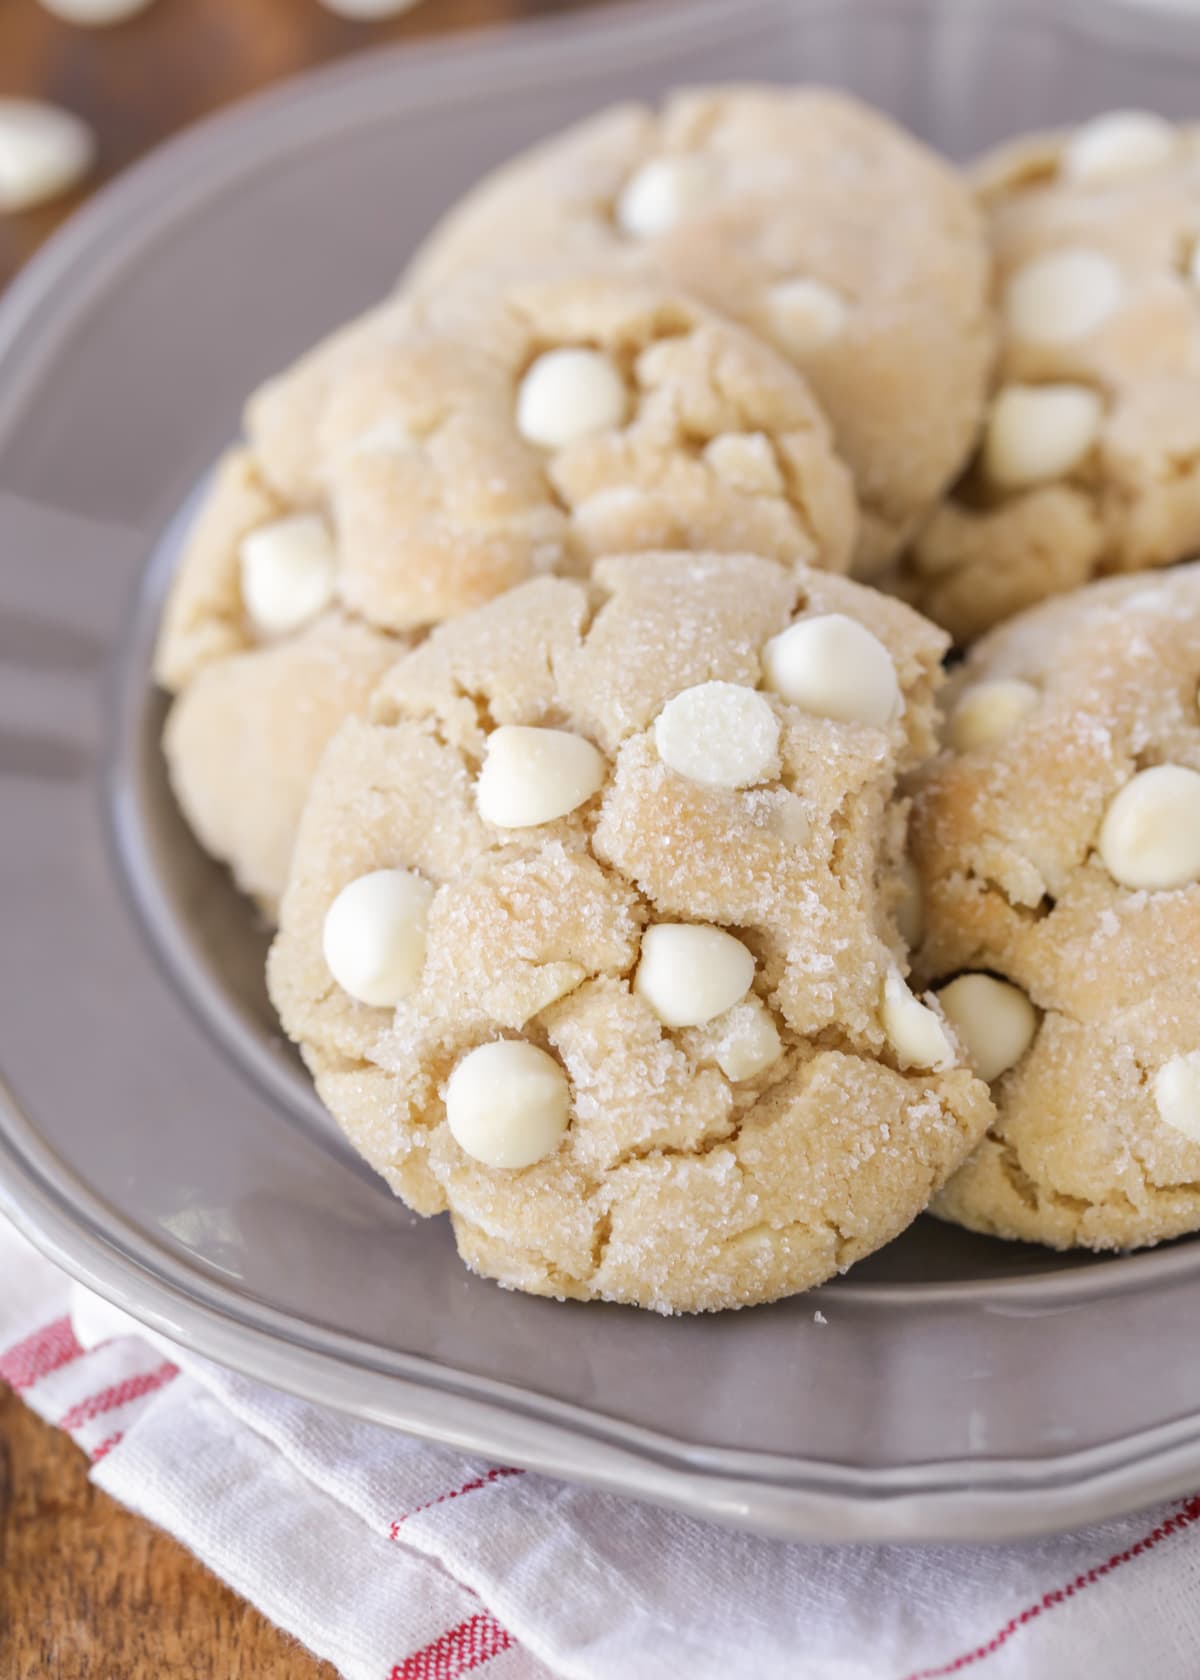 Plate filled with white chocolate crackle cookies